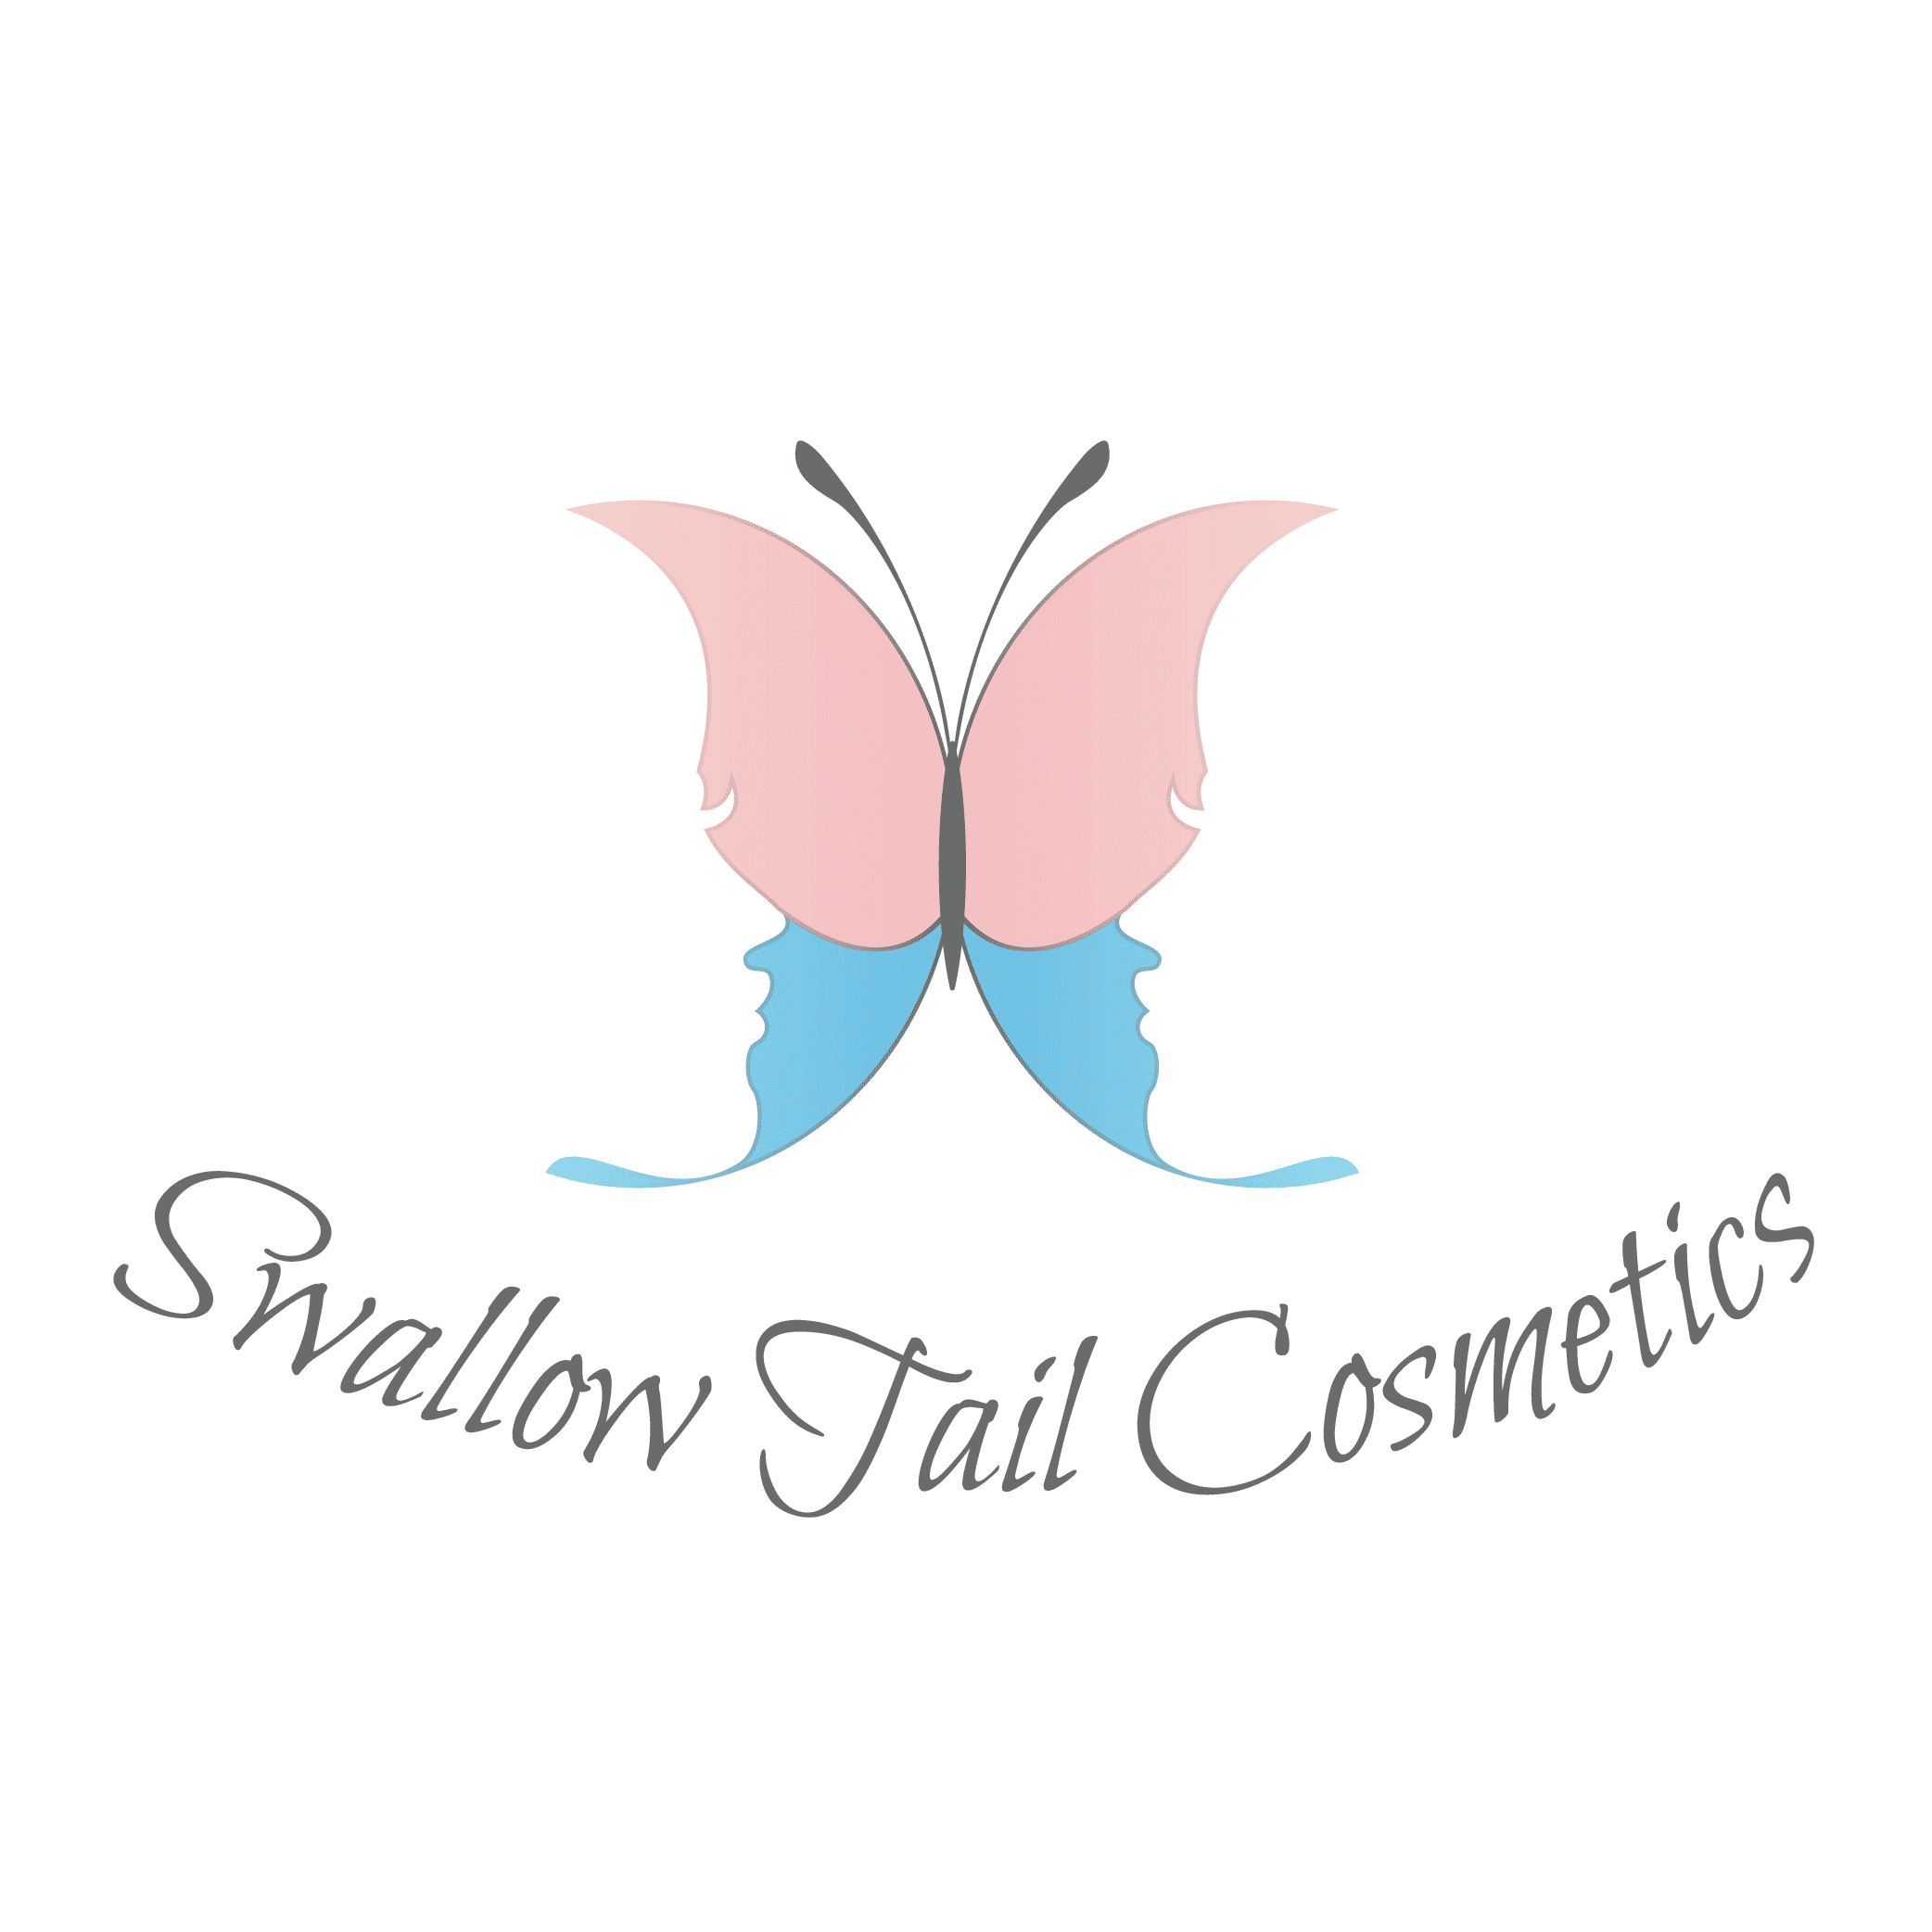 An image of the Swallow Tail Cosmetics logo